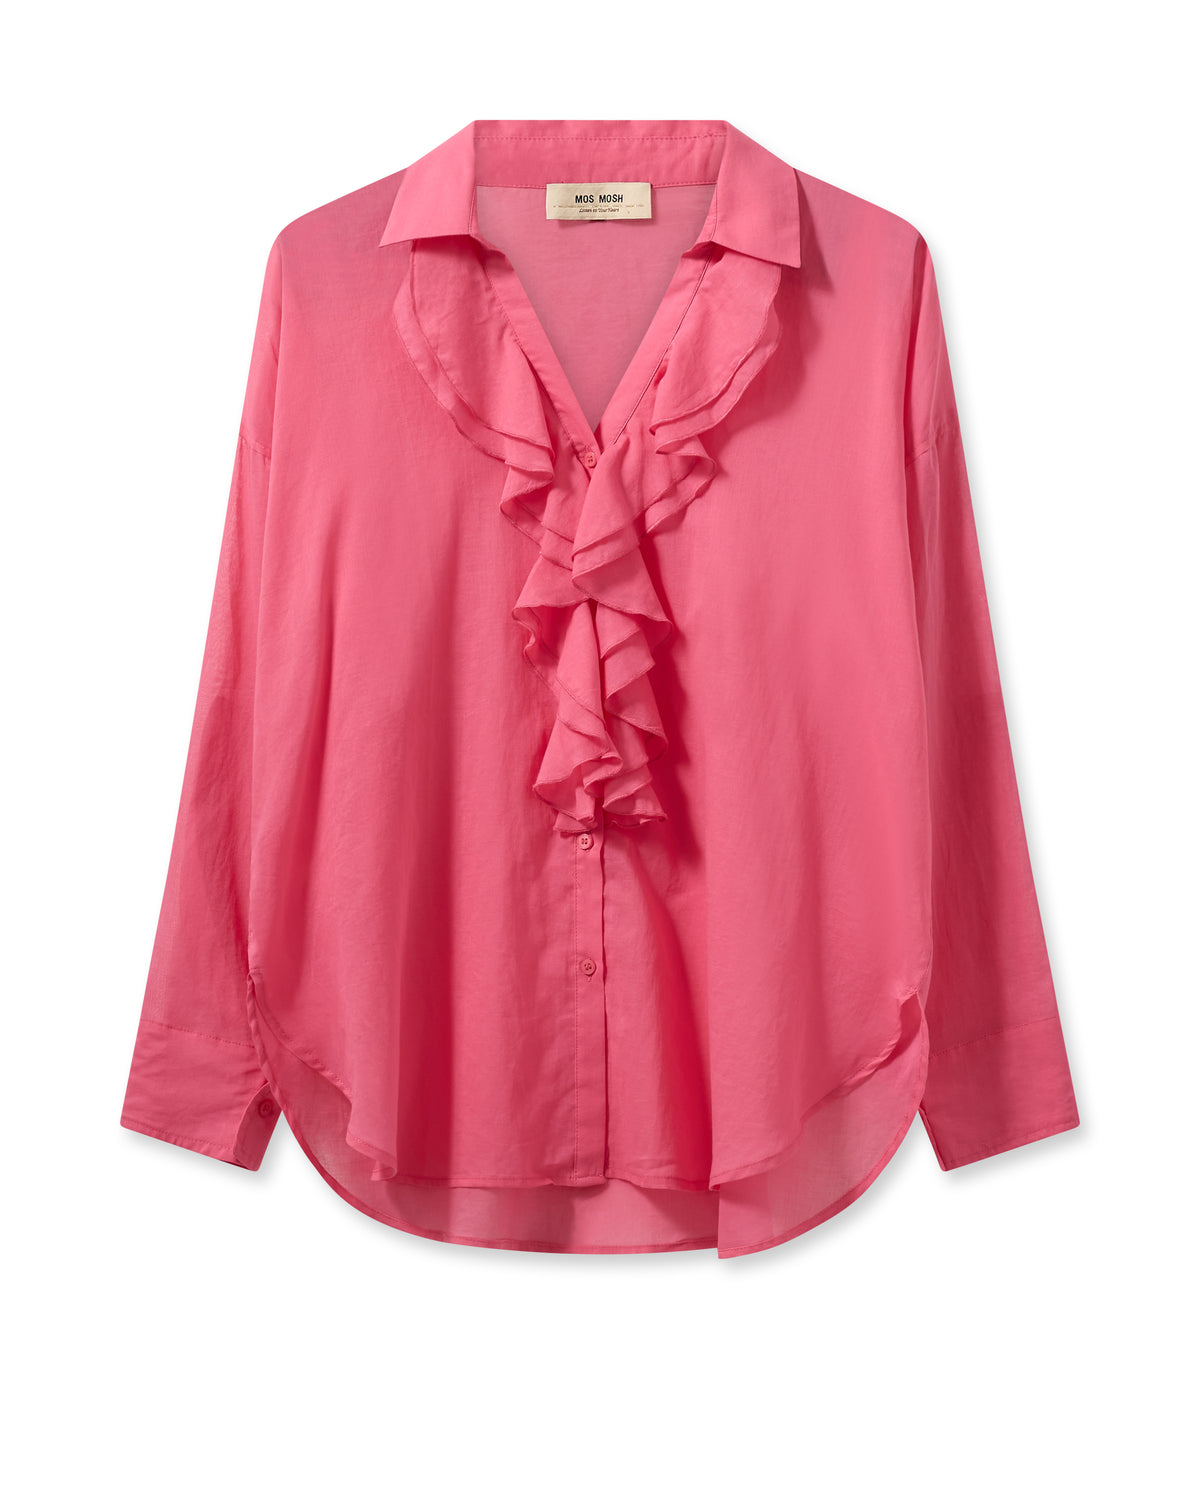 Pink shirt with ruffle detail and button back sleeve